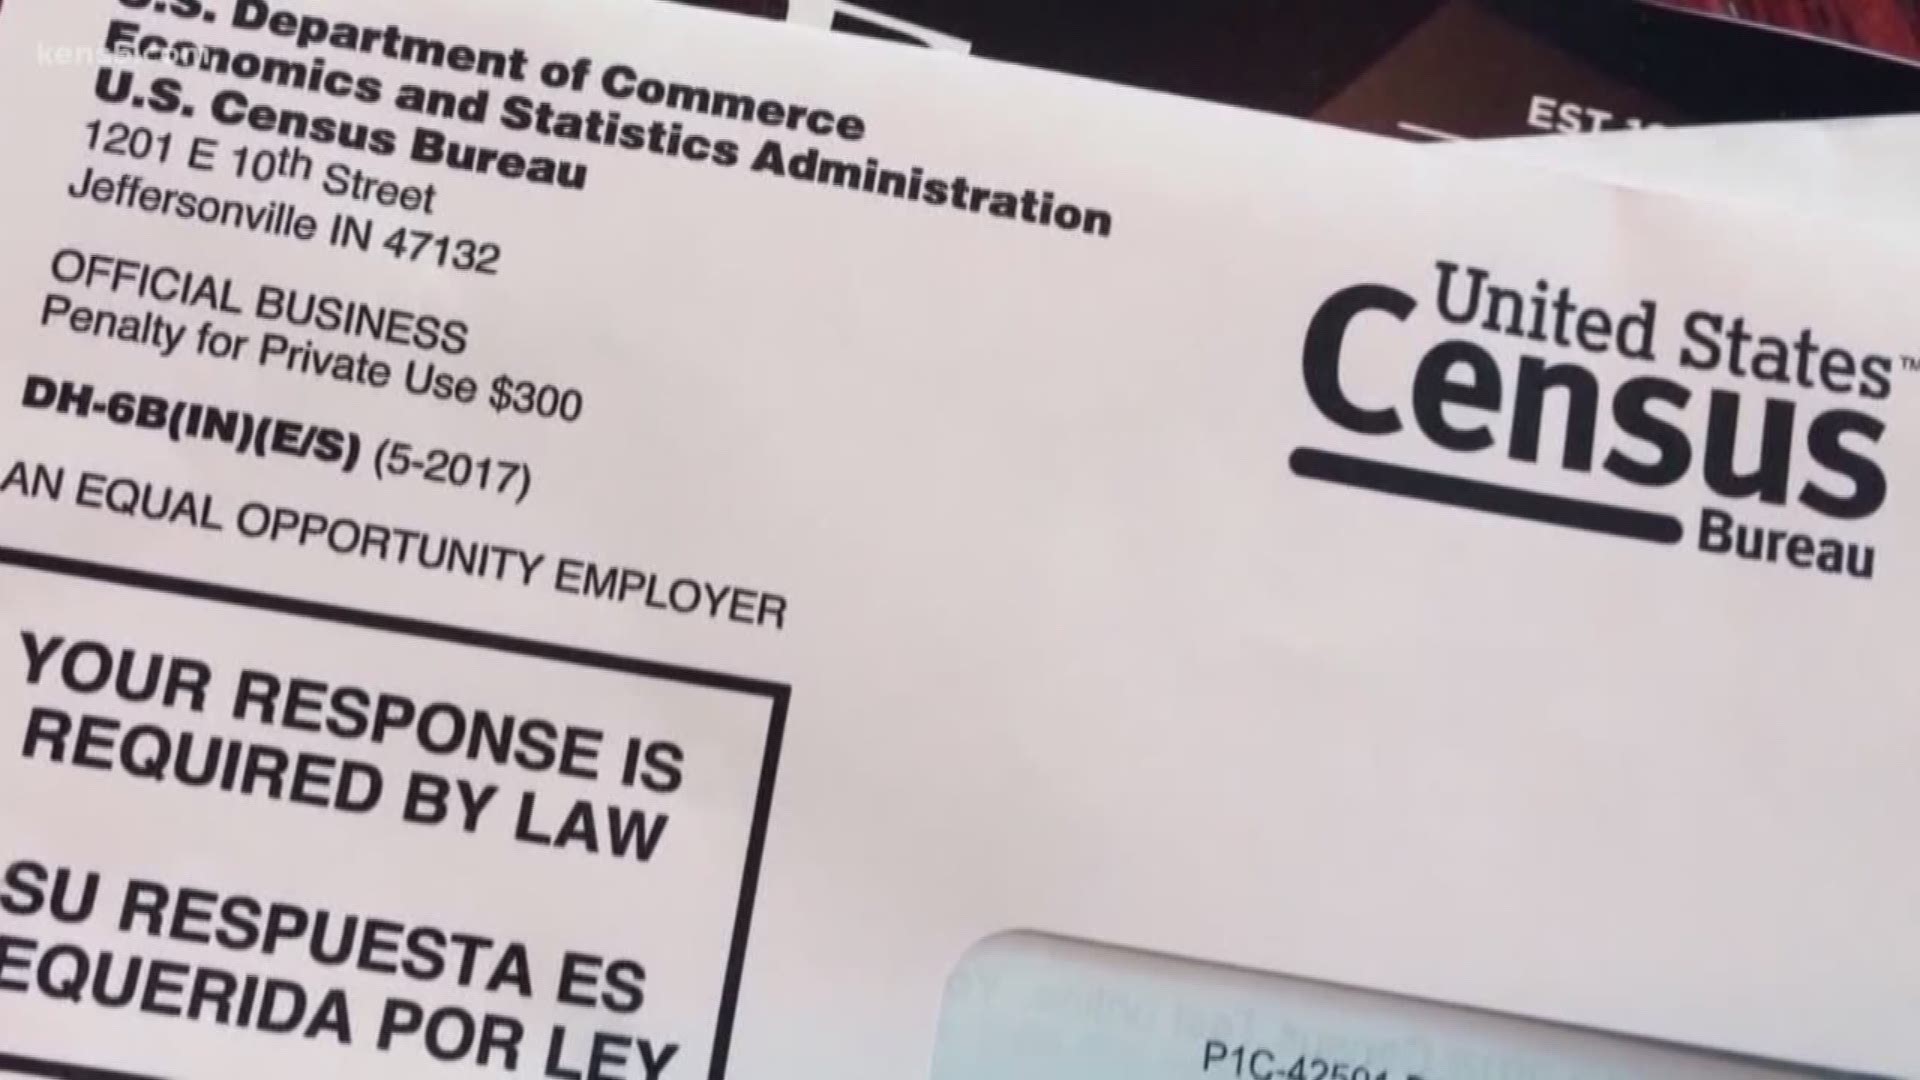 Nearly 2 million live in Bexar County, and the government is now hiring thousands of people to count them all.